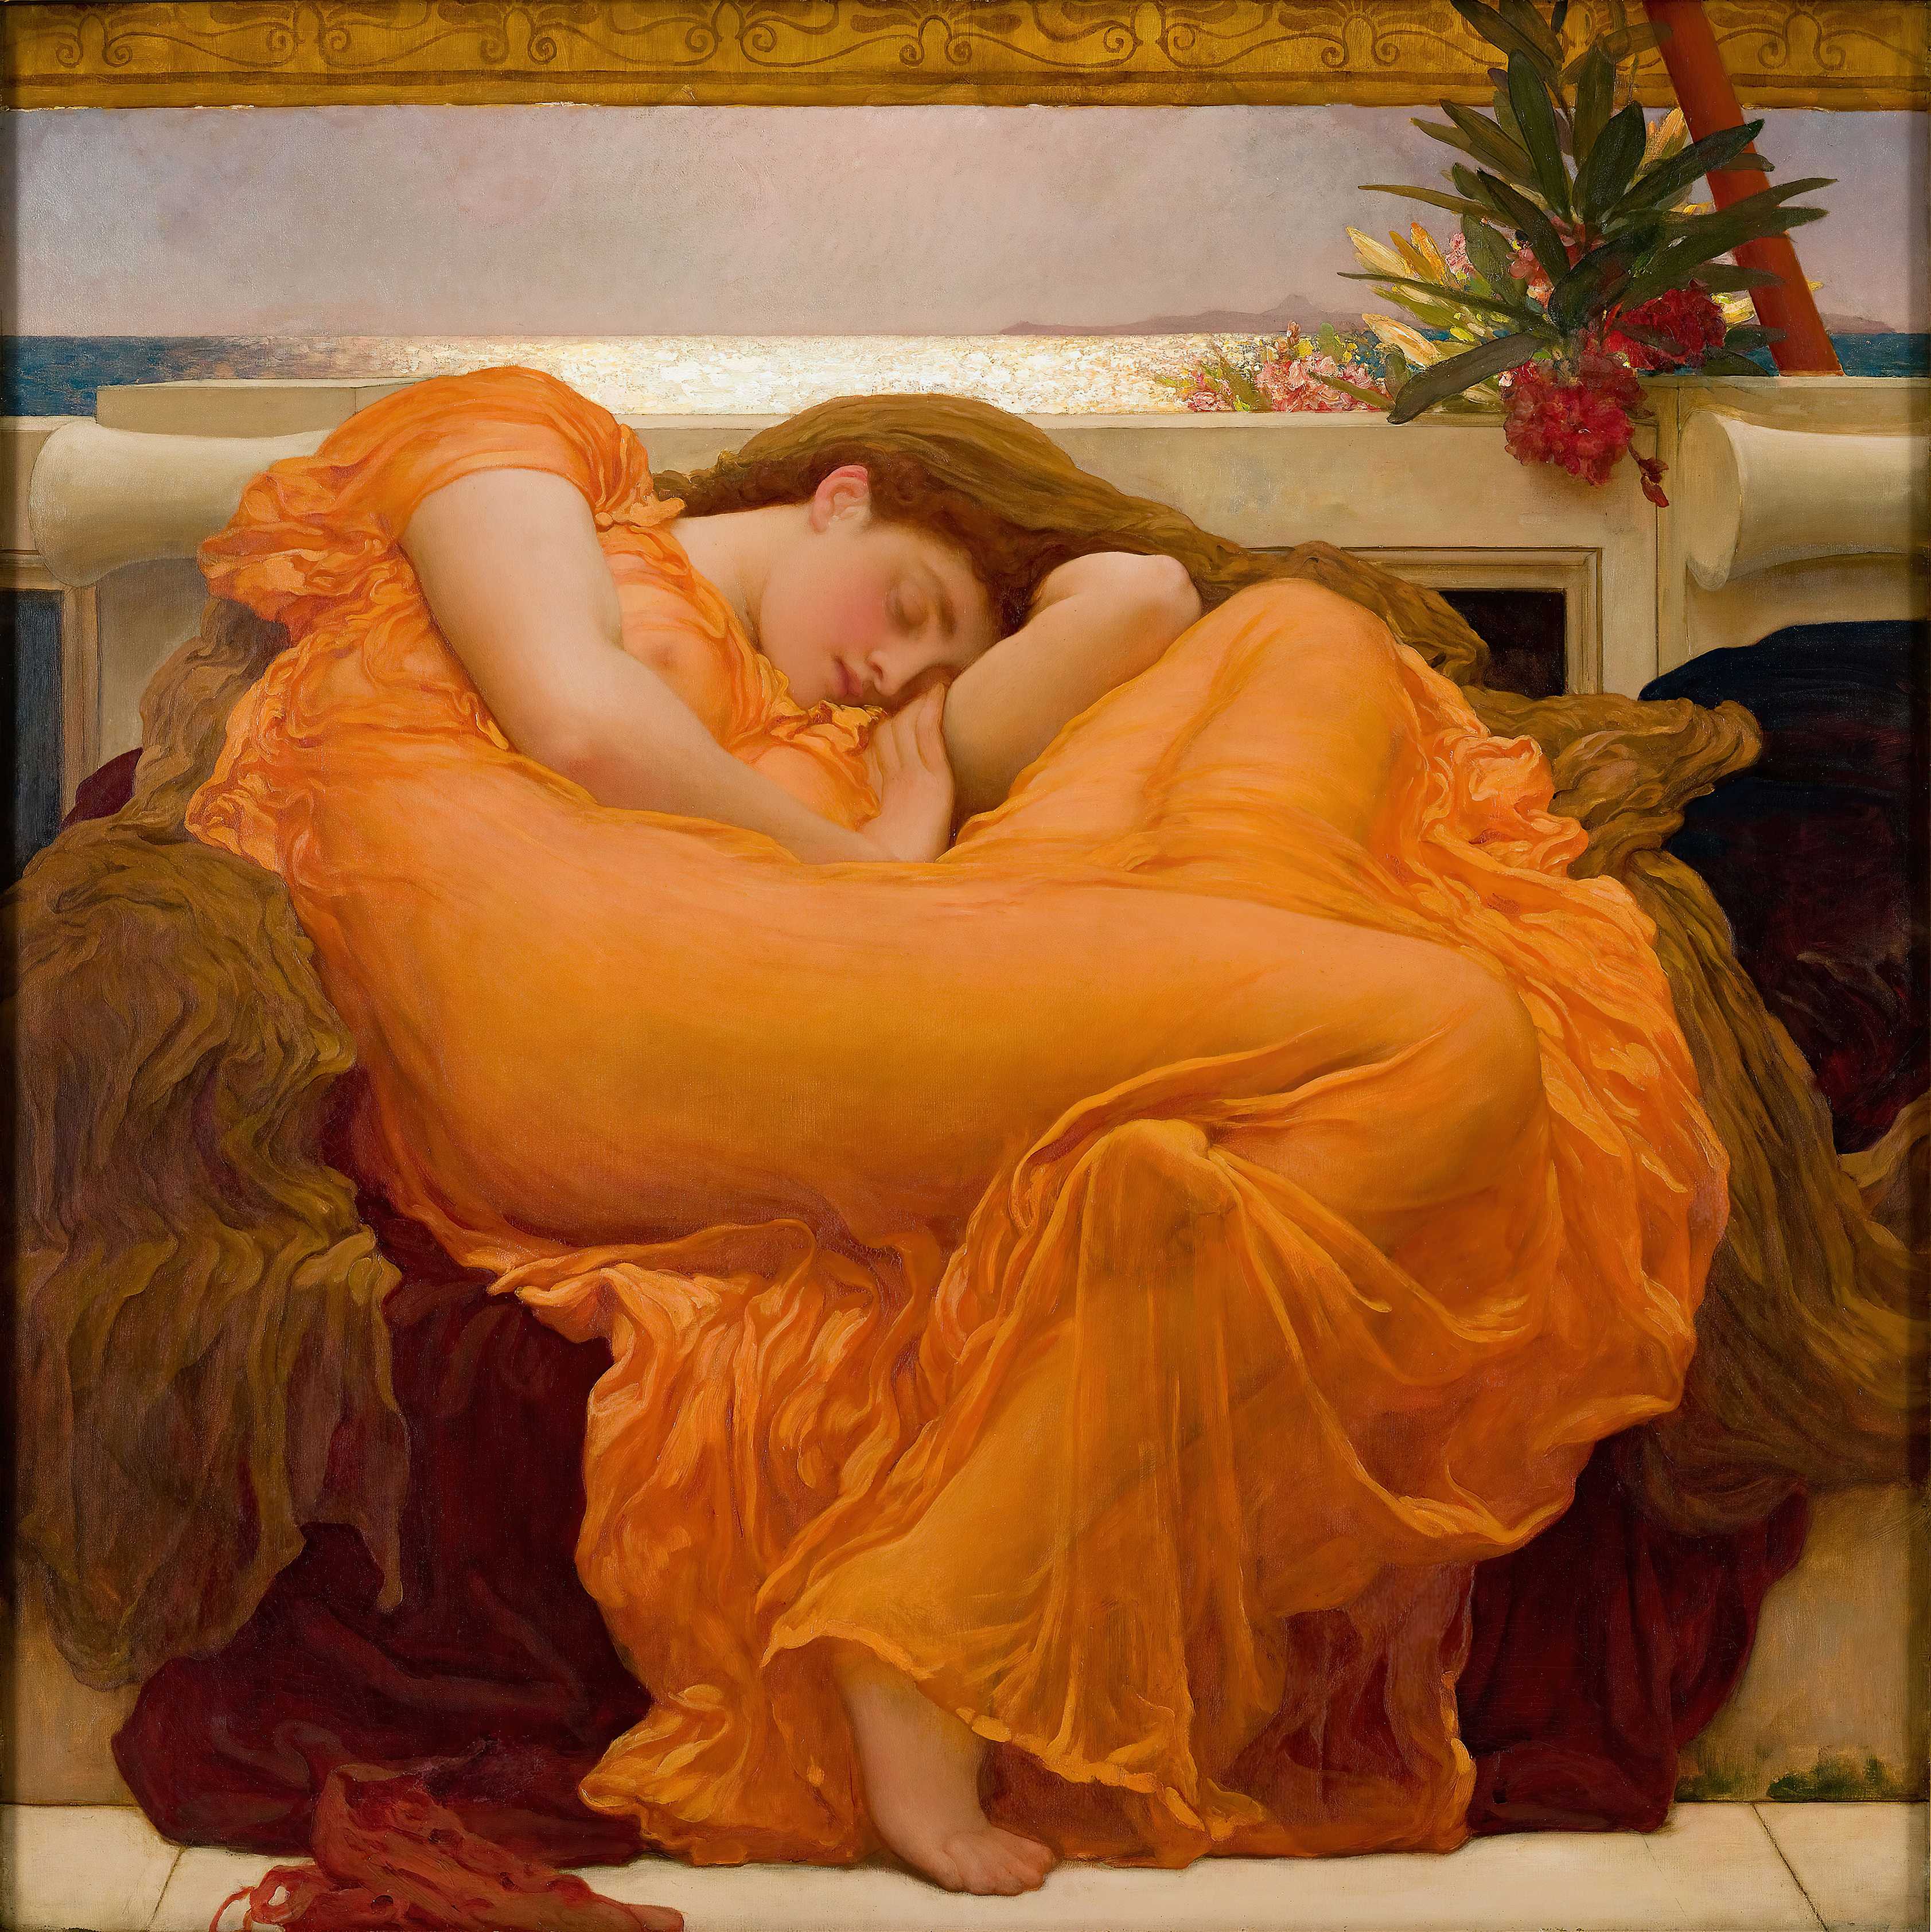 Find out more about Frederic Leighton - Flaming June